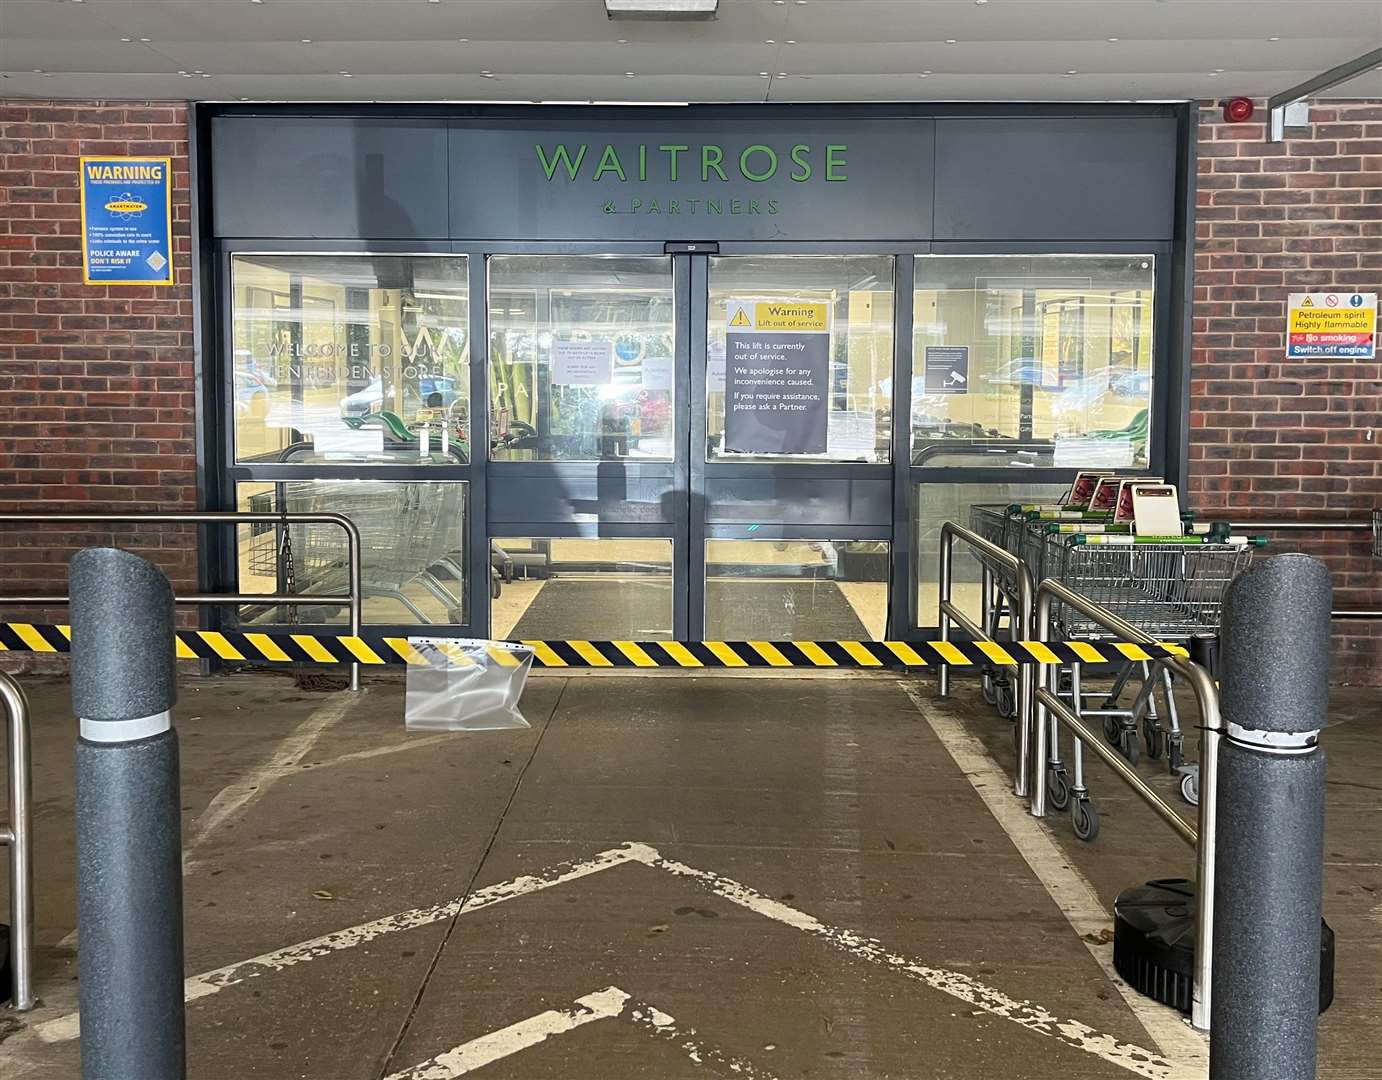 The lower level entrance to the store, where customers normally access the lifts was closed off as both lifts were out of action